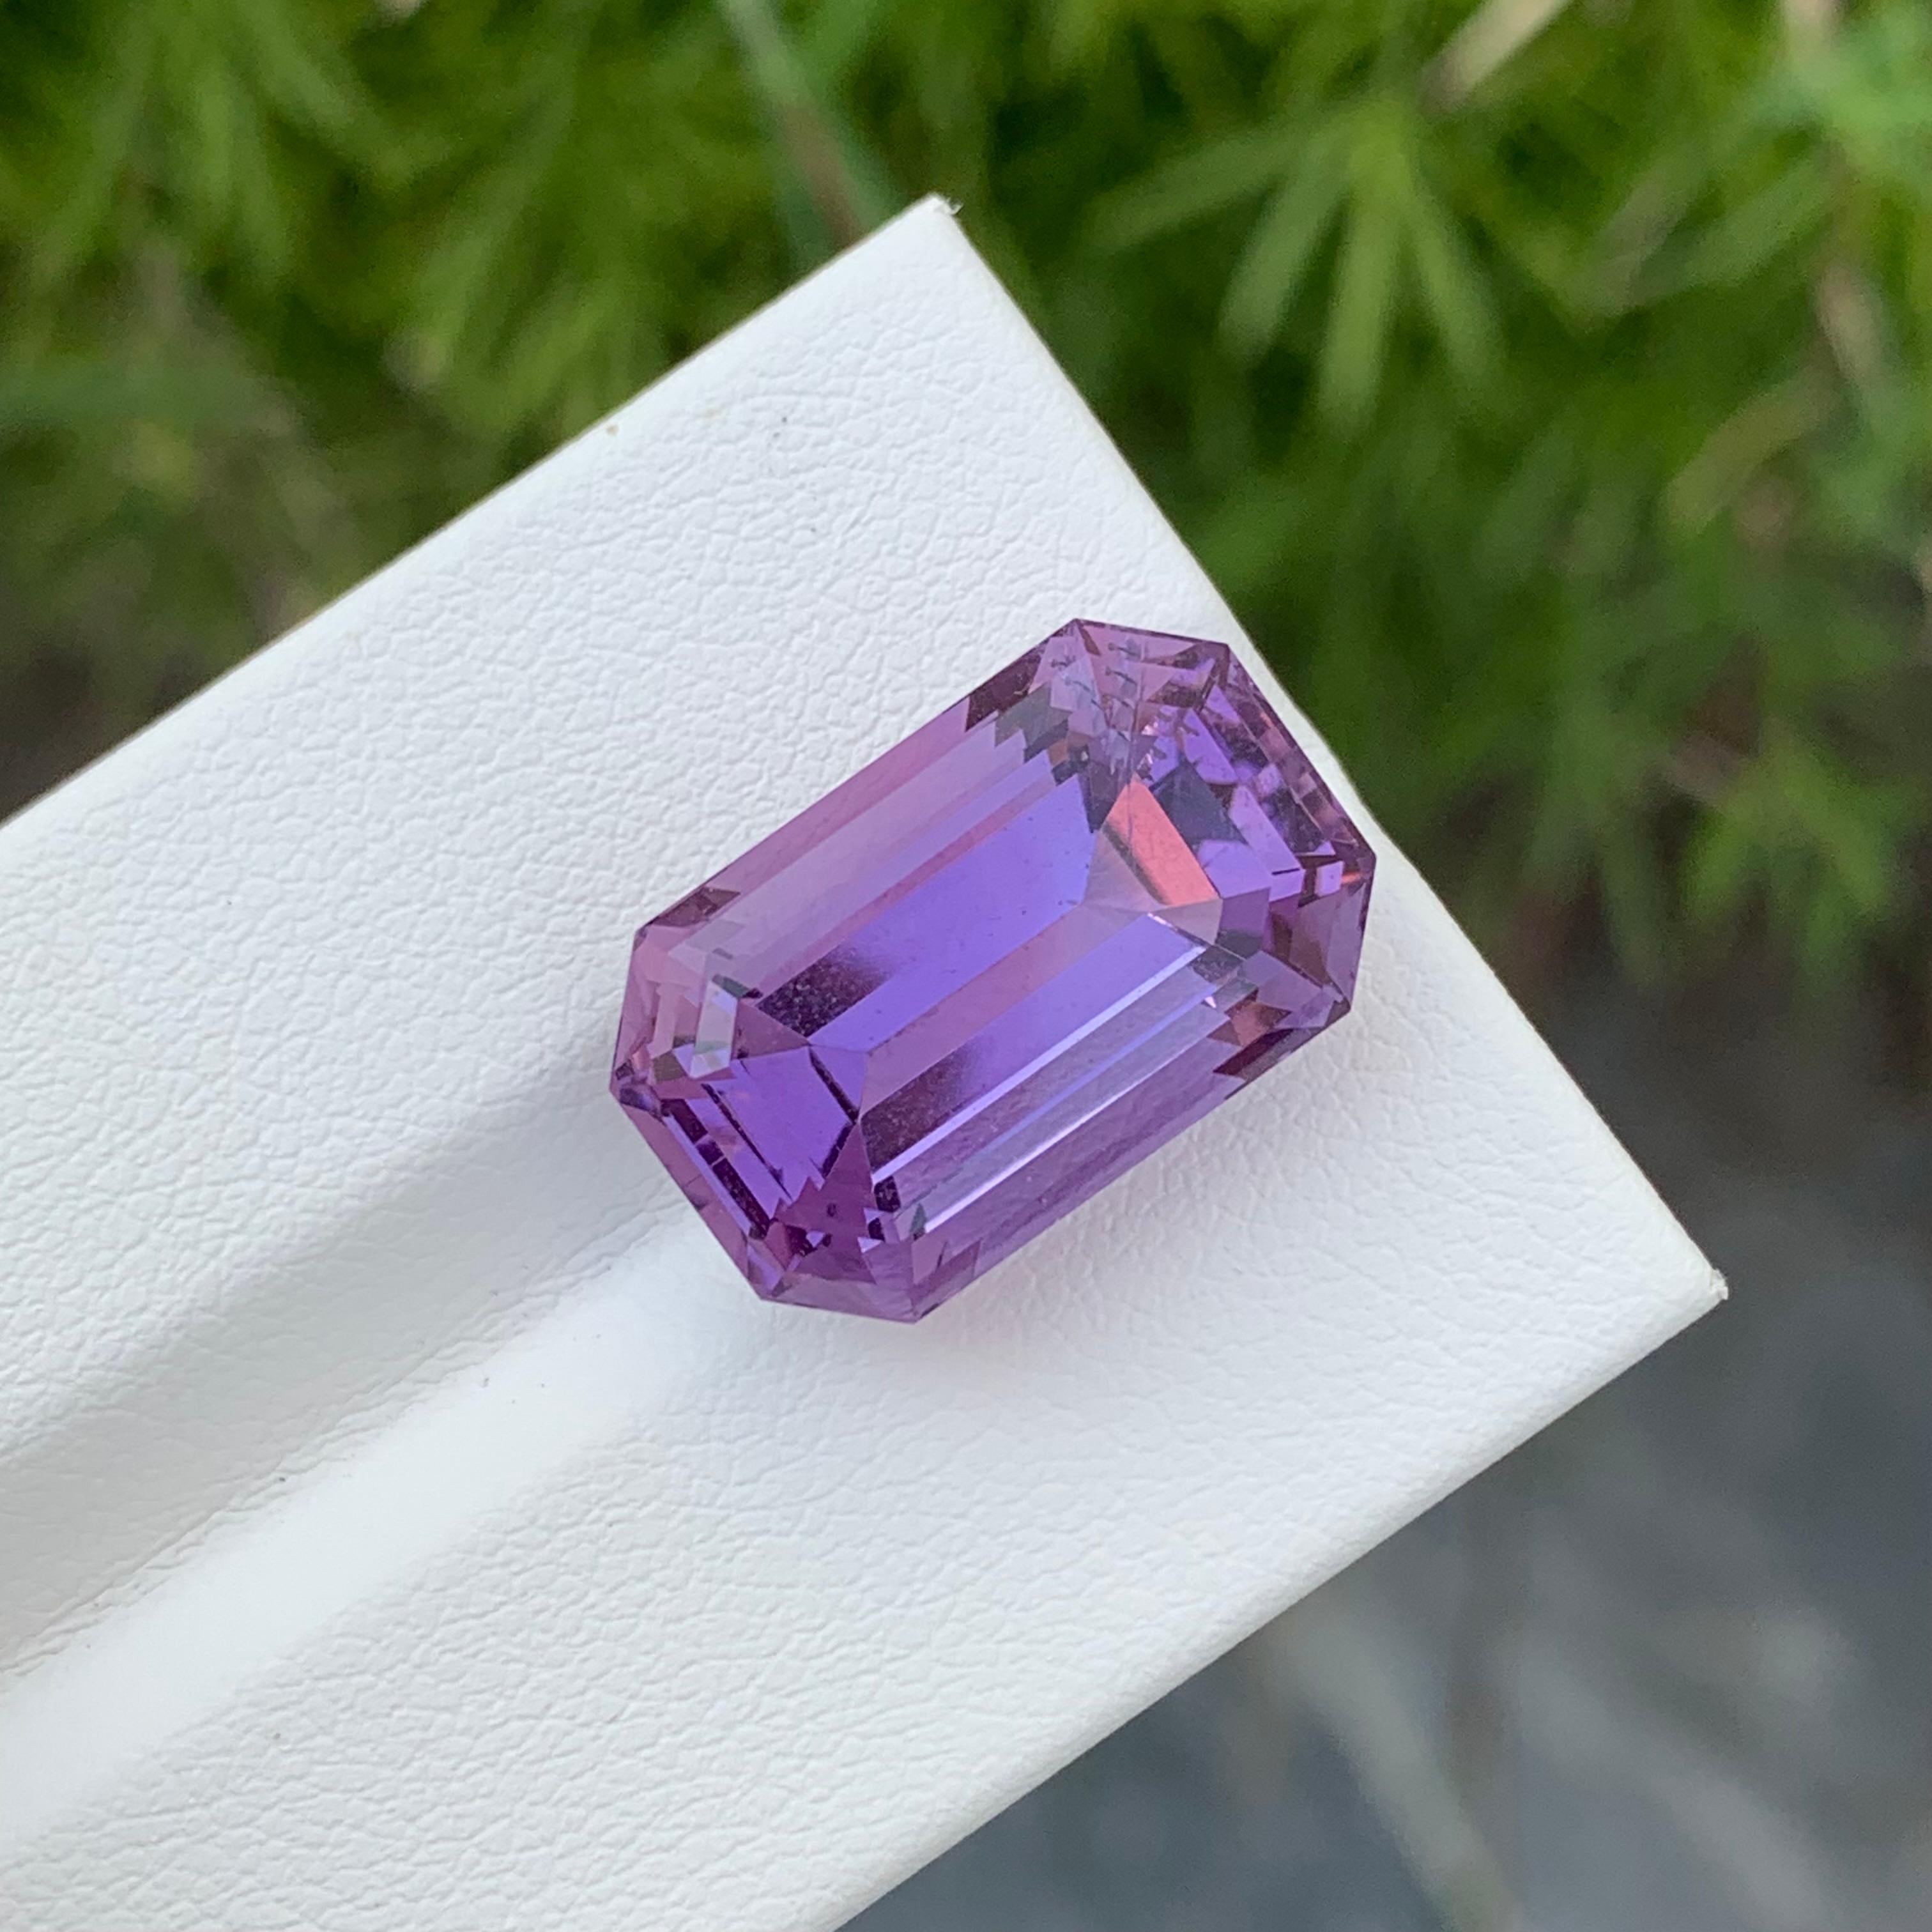 Loose Amethyst
Weight: 14.35 Carats
Dimension: 17.9 x 11.4 x 10 Mm
Colour: Purple
Origin: Brazil
Treatment: Non
Certificate: On Demand
Shape: Emerald 

Amethyst, a stunning variety of quartz known for its mesmerizing purple hue, has captivated